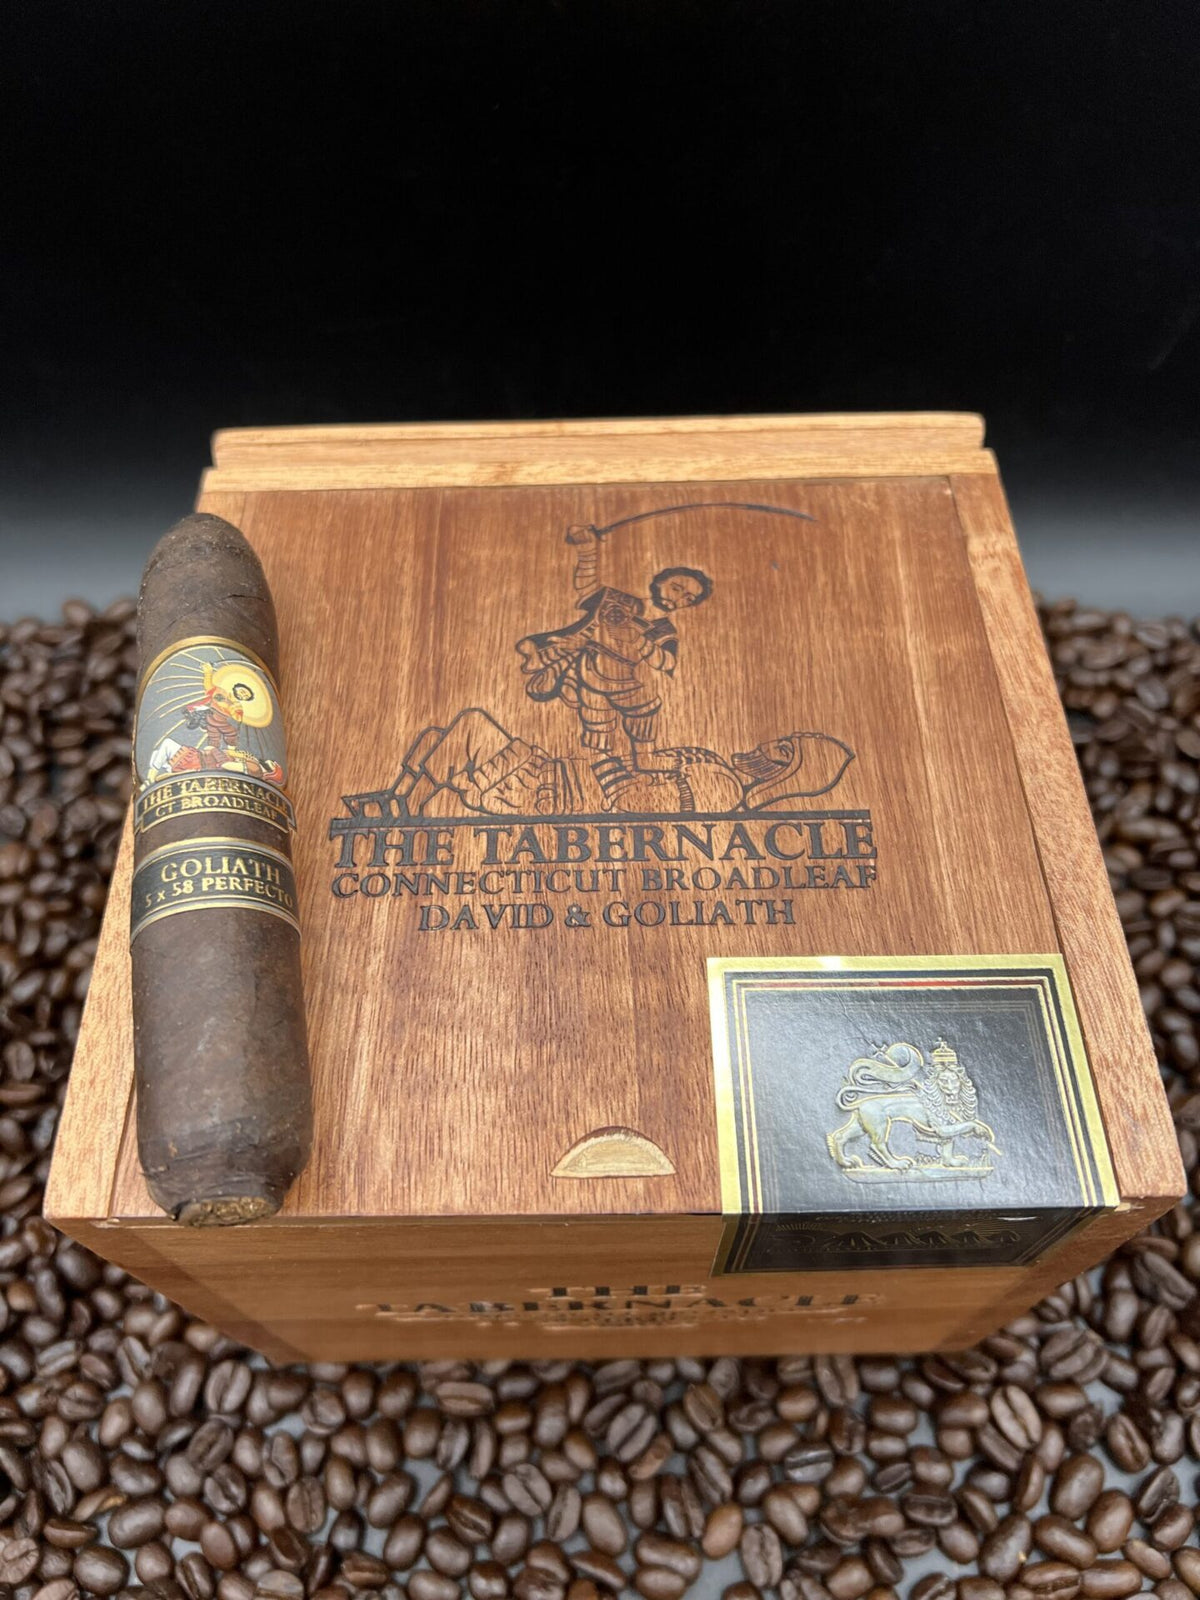 Foundation Cigars - Tabernacle Goliath cigars supplied by Sir Louis Cigars